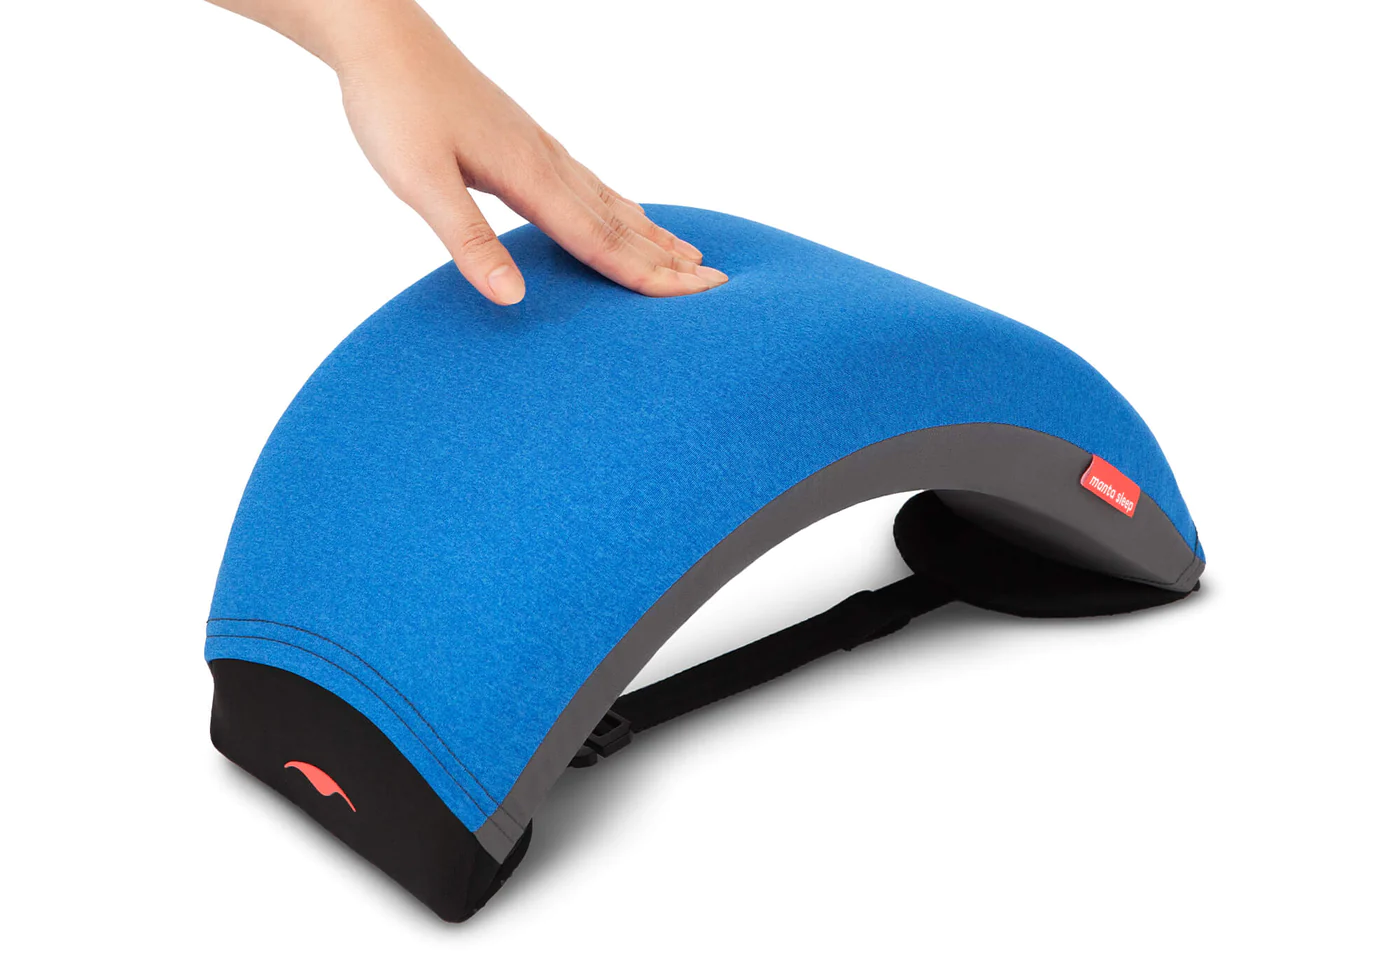 A hand pressing the surface of a blue nap pillow with an arc design.